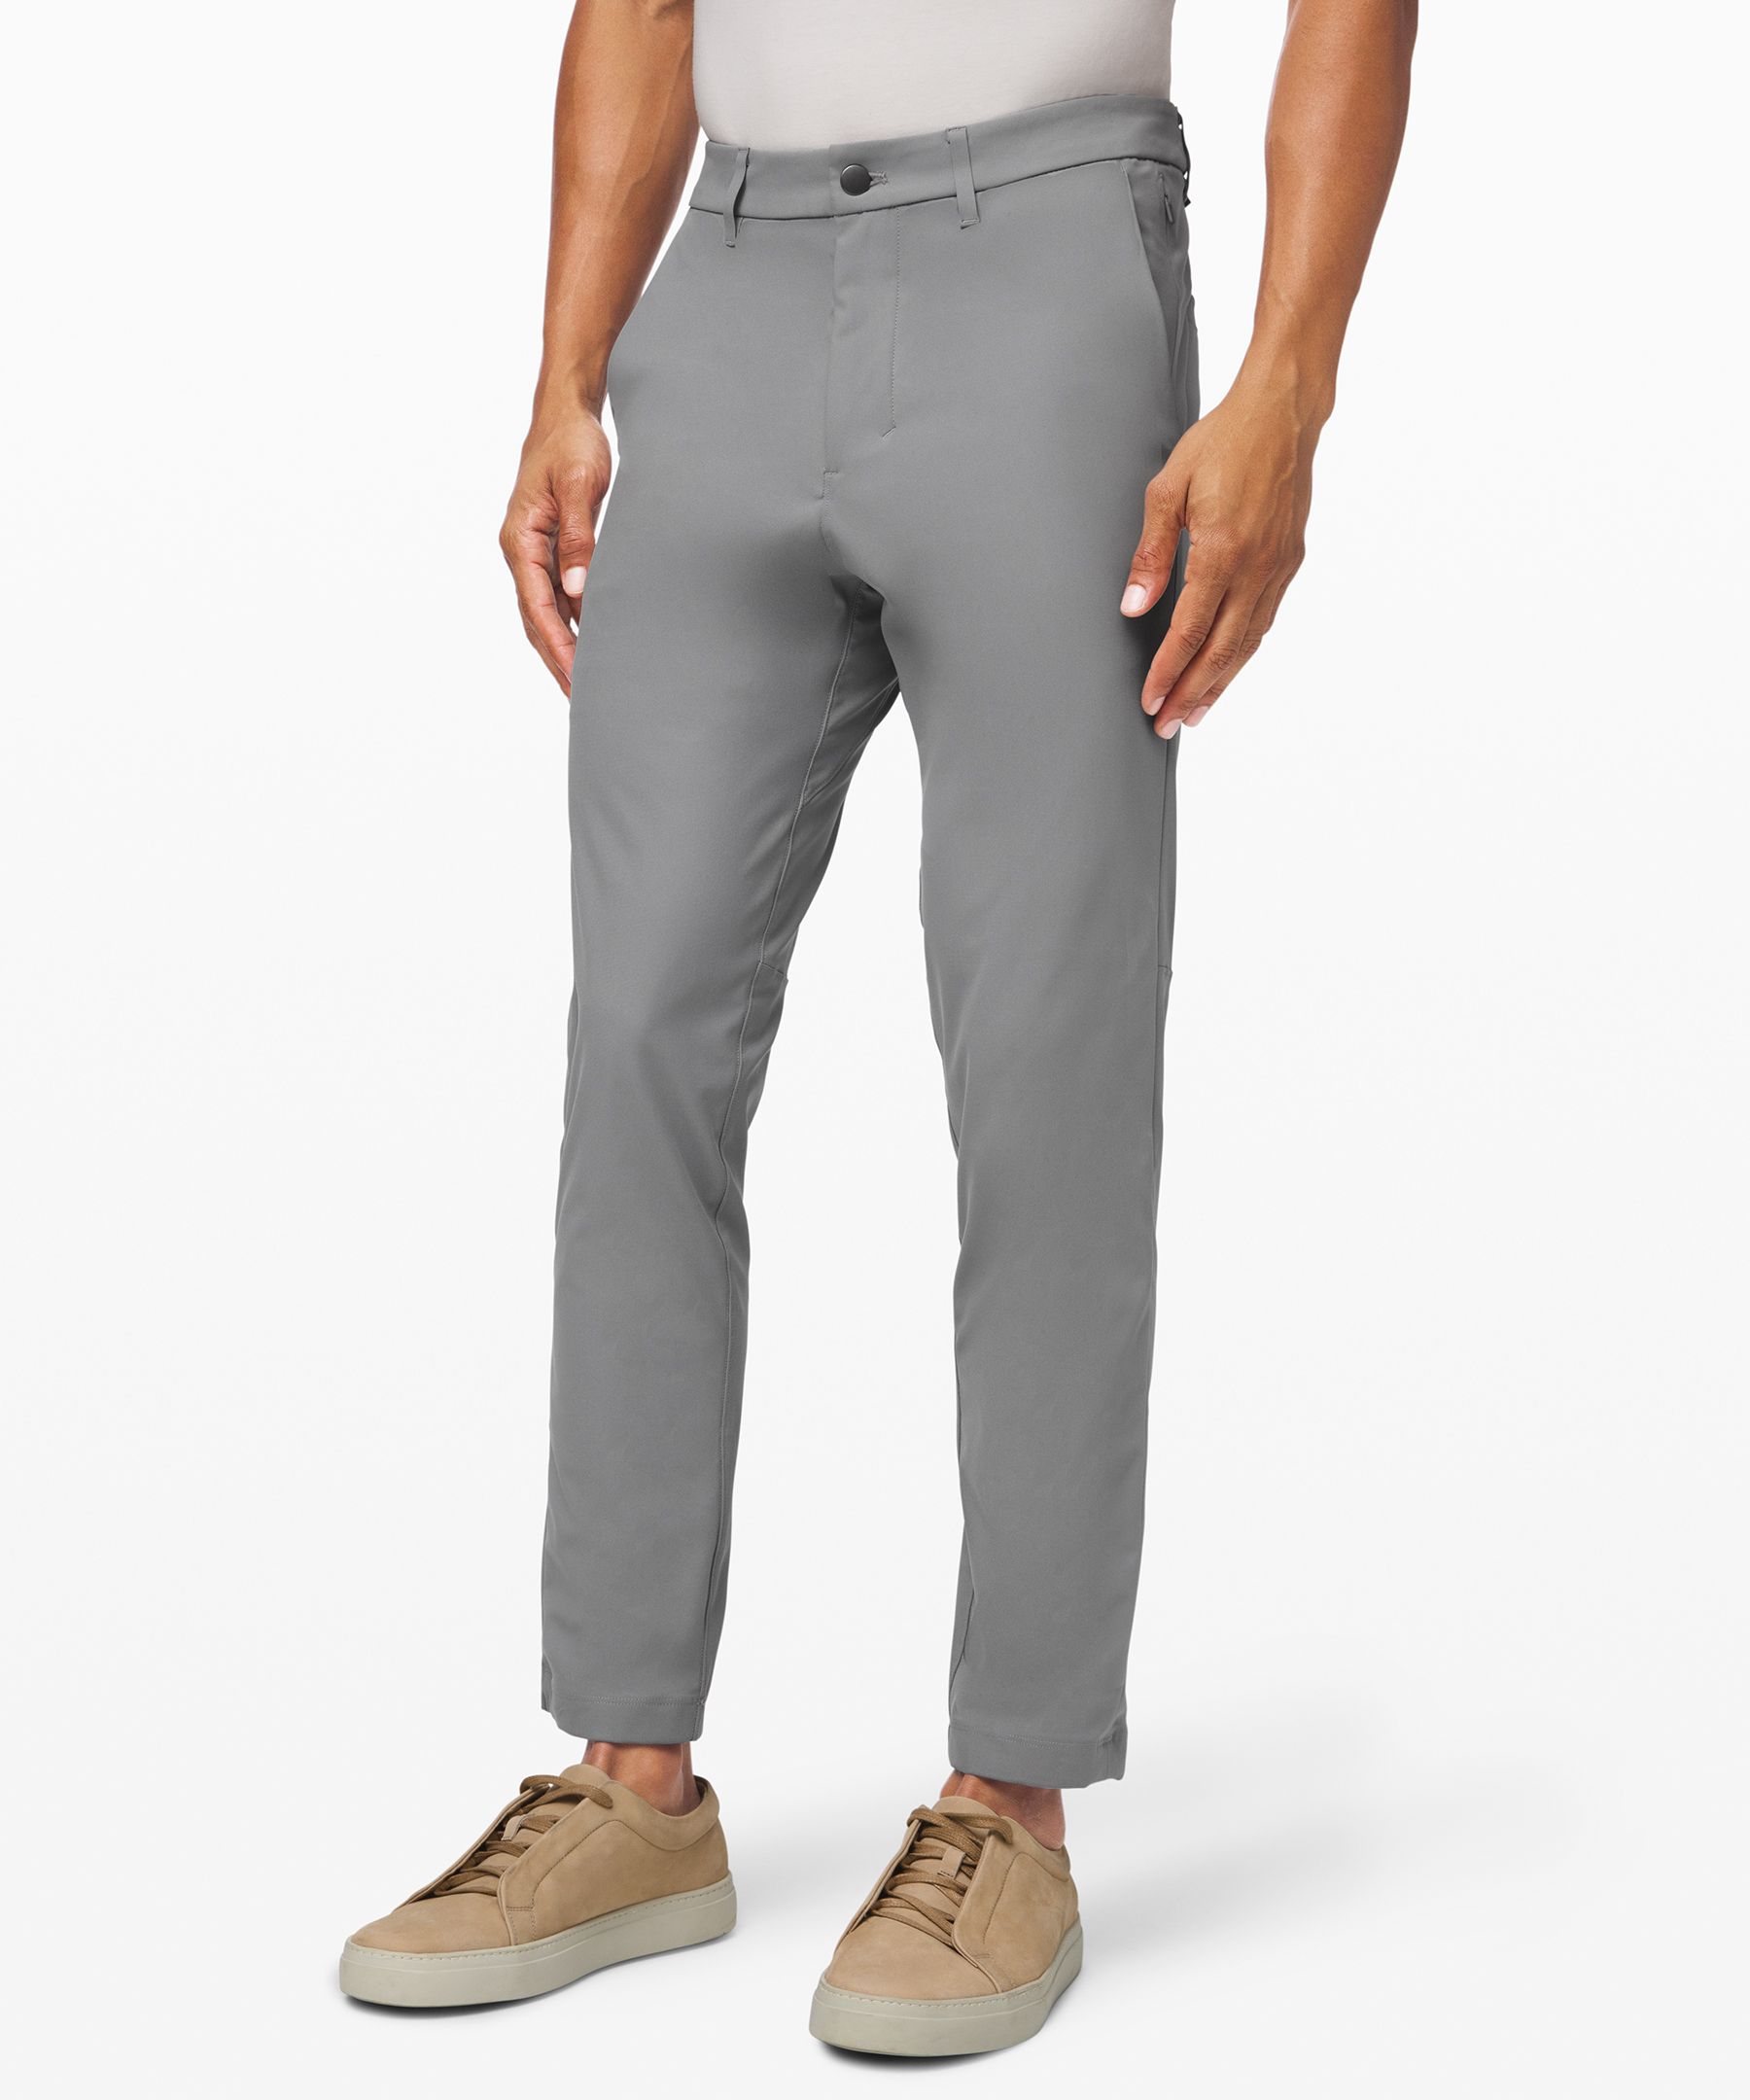 Lululemon Commission Pant Classic Review  International Society of  Precision Agriculture